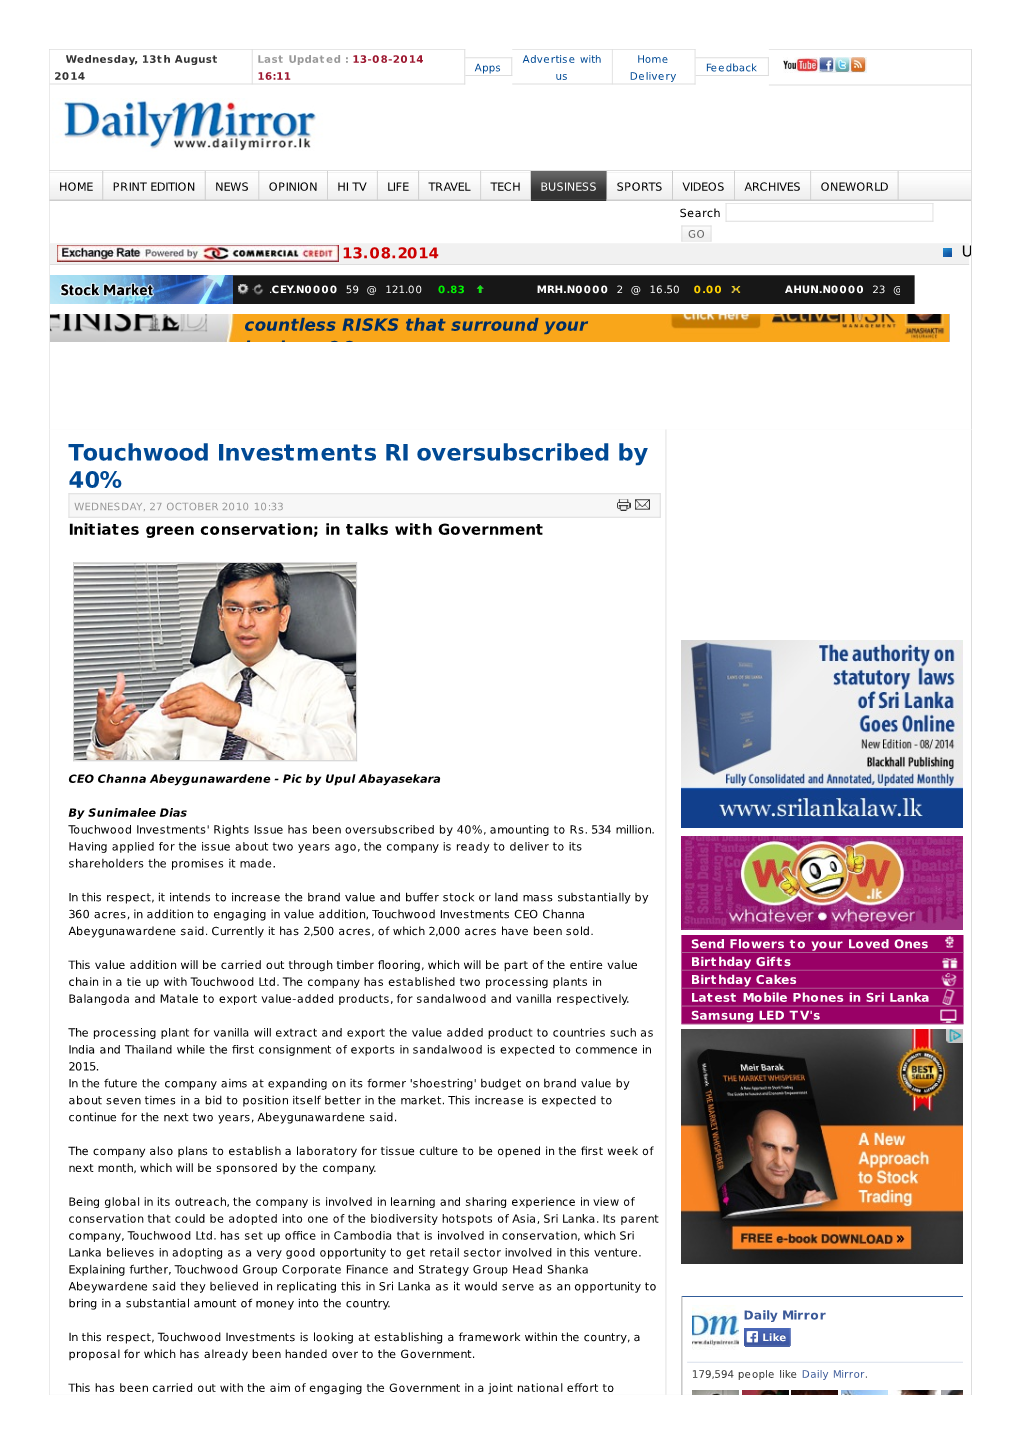 Touchwood Investments RI Oversubscribed by 40% WEDNESDAY, 27 OCTOBER 2010 10:33 Initiates Green Conservation; in Talks with Government